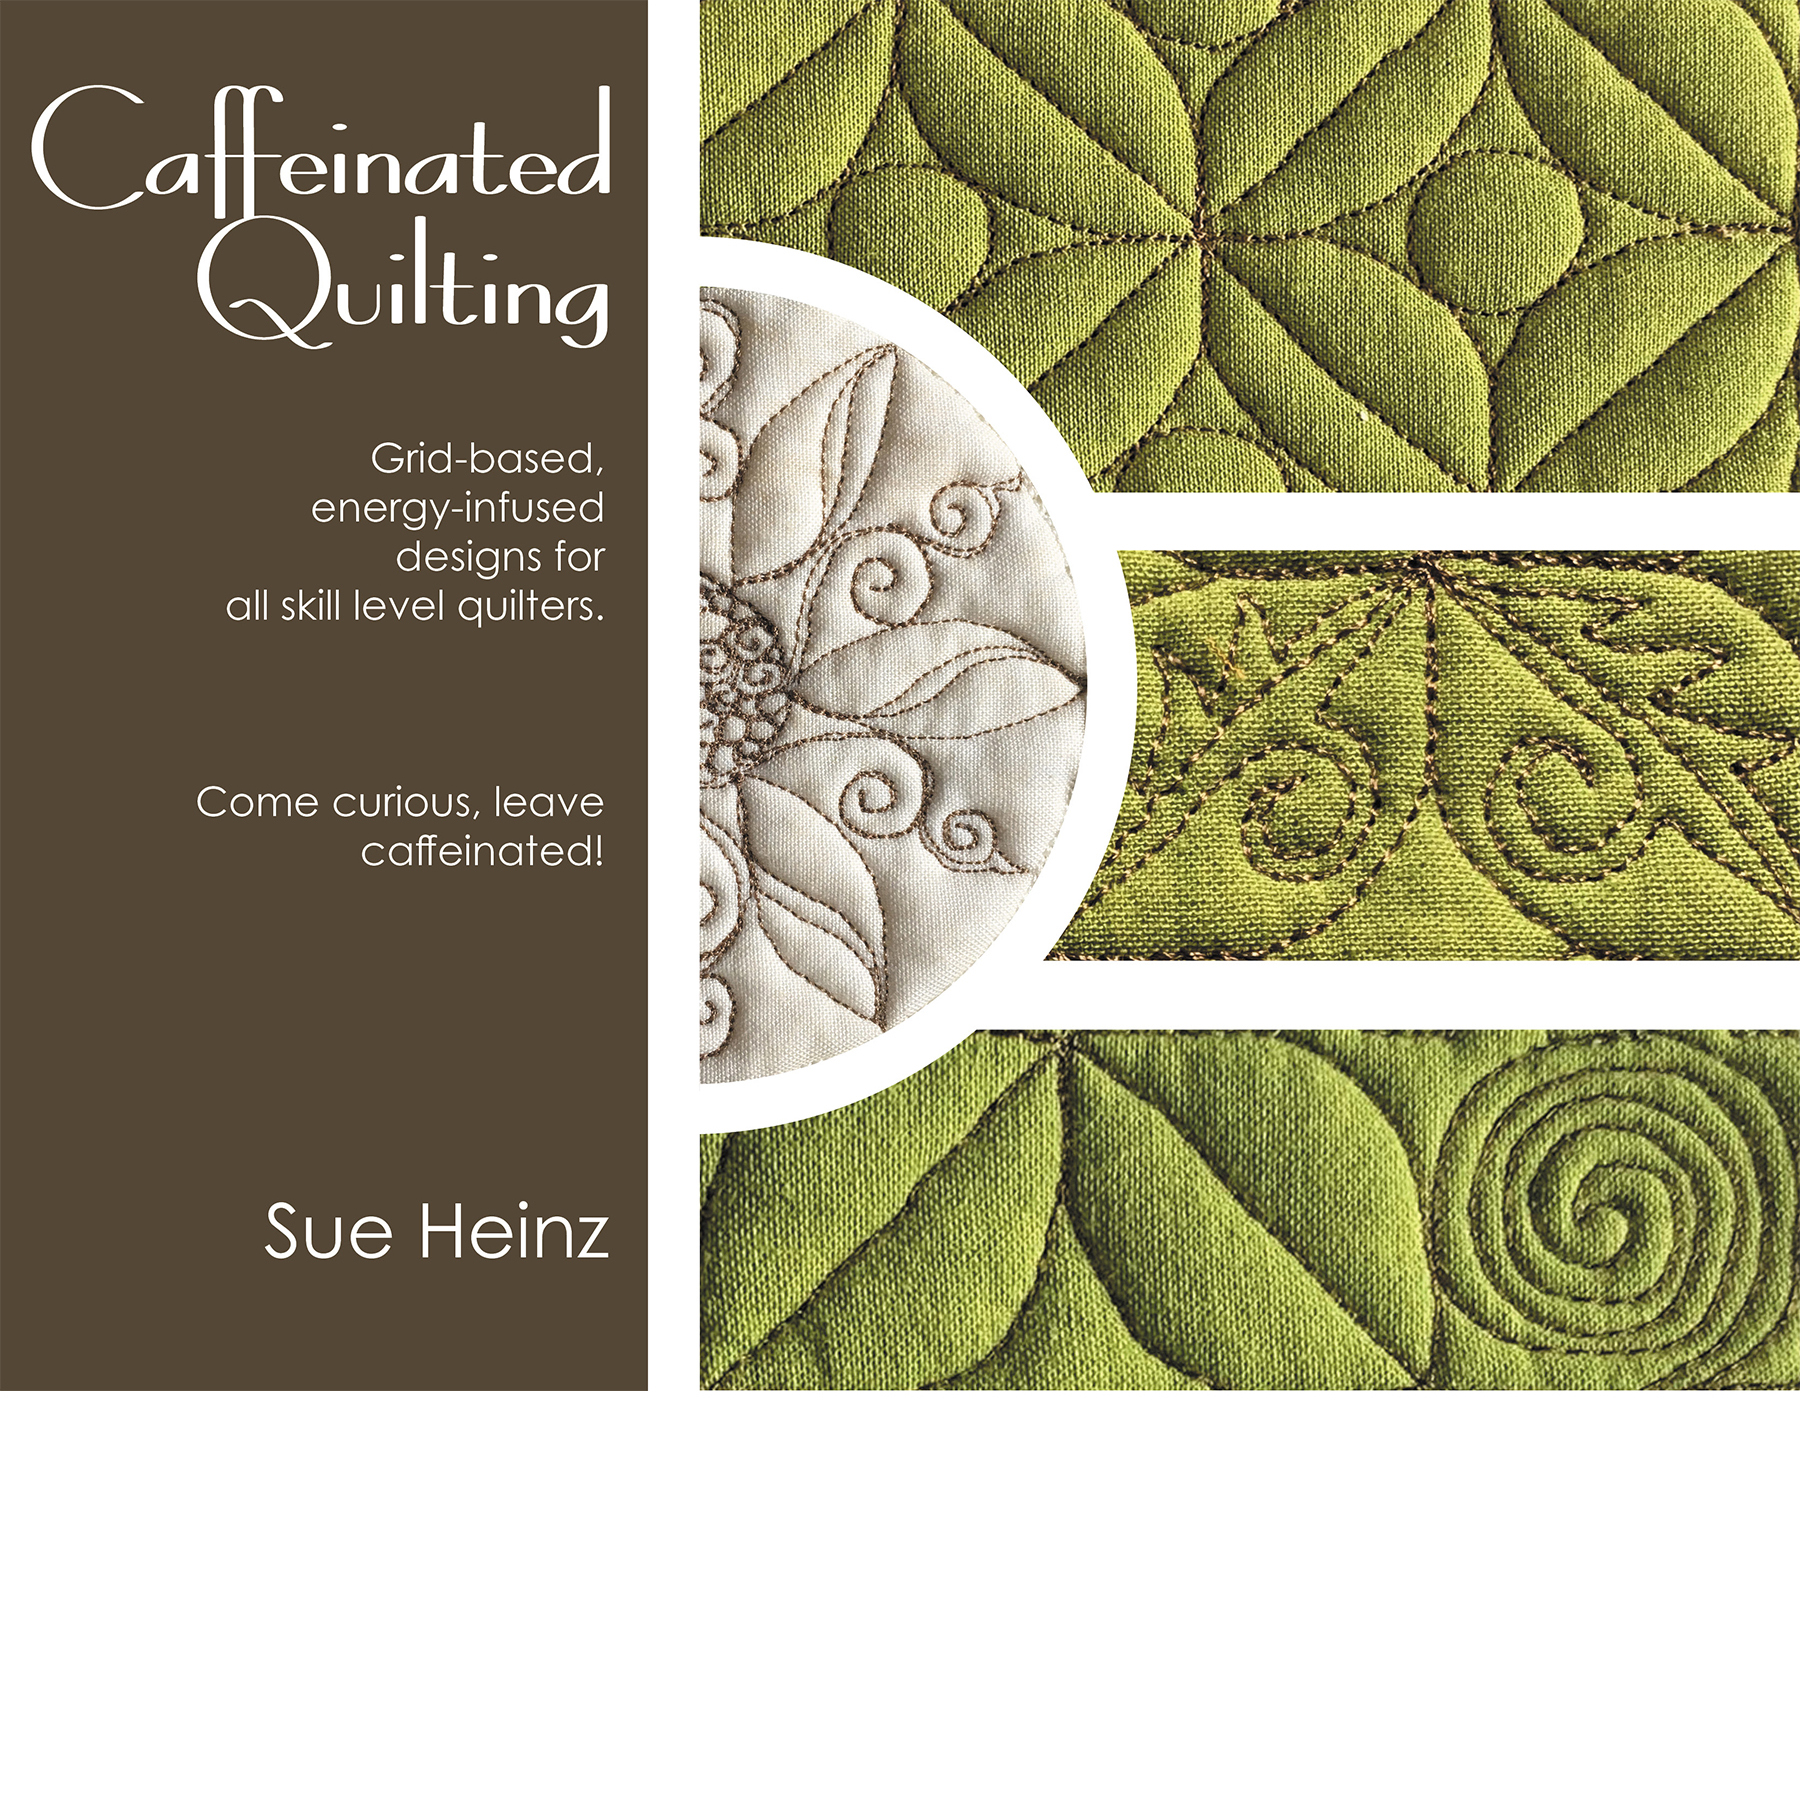 Featured image for “Caffeinated Quilting”